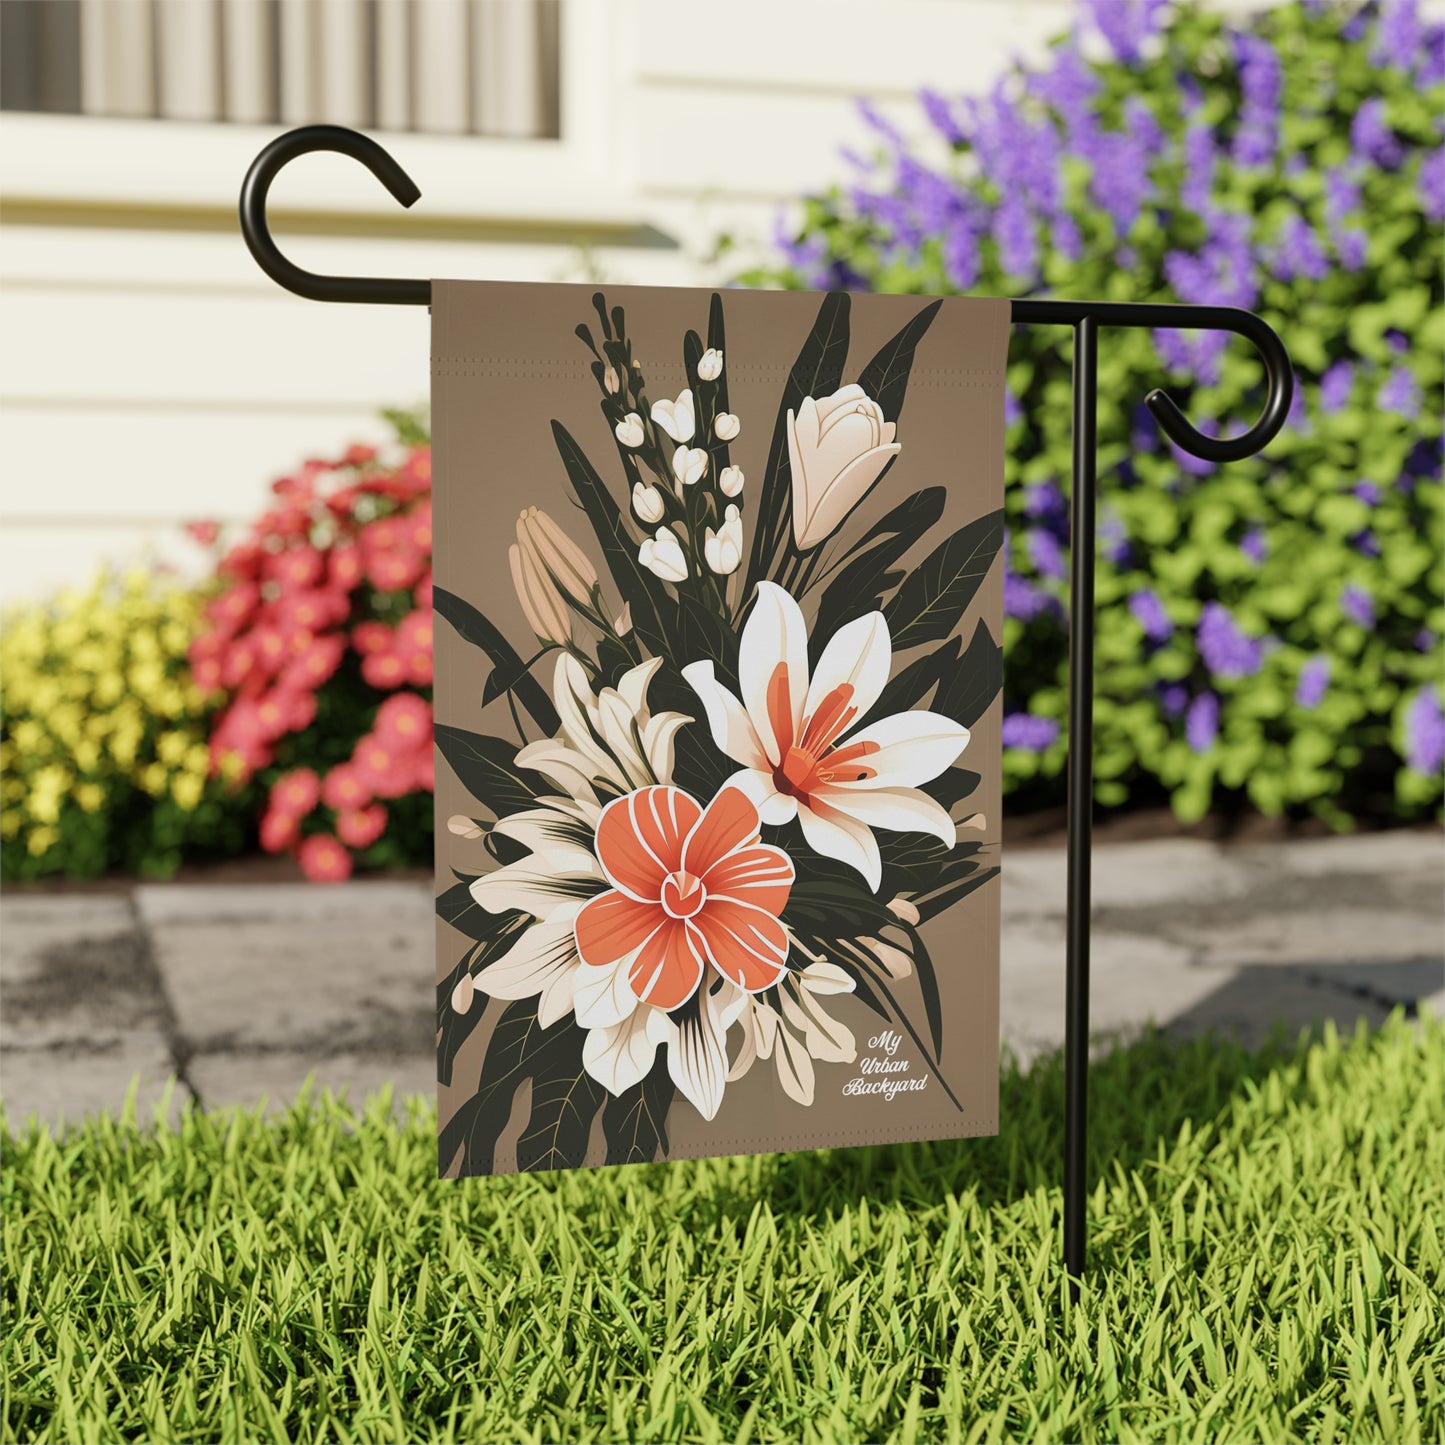 Bouquet of Flowers, Garden Flag for Yard, Patio, Porch, or Work, 12"x18" - Flag only